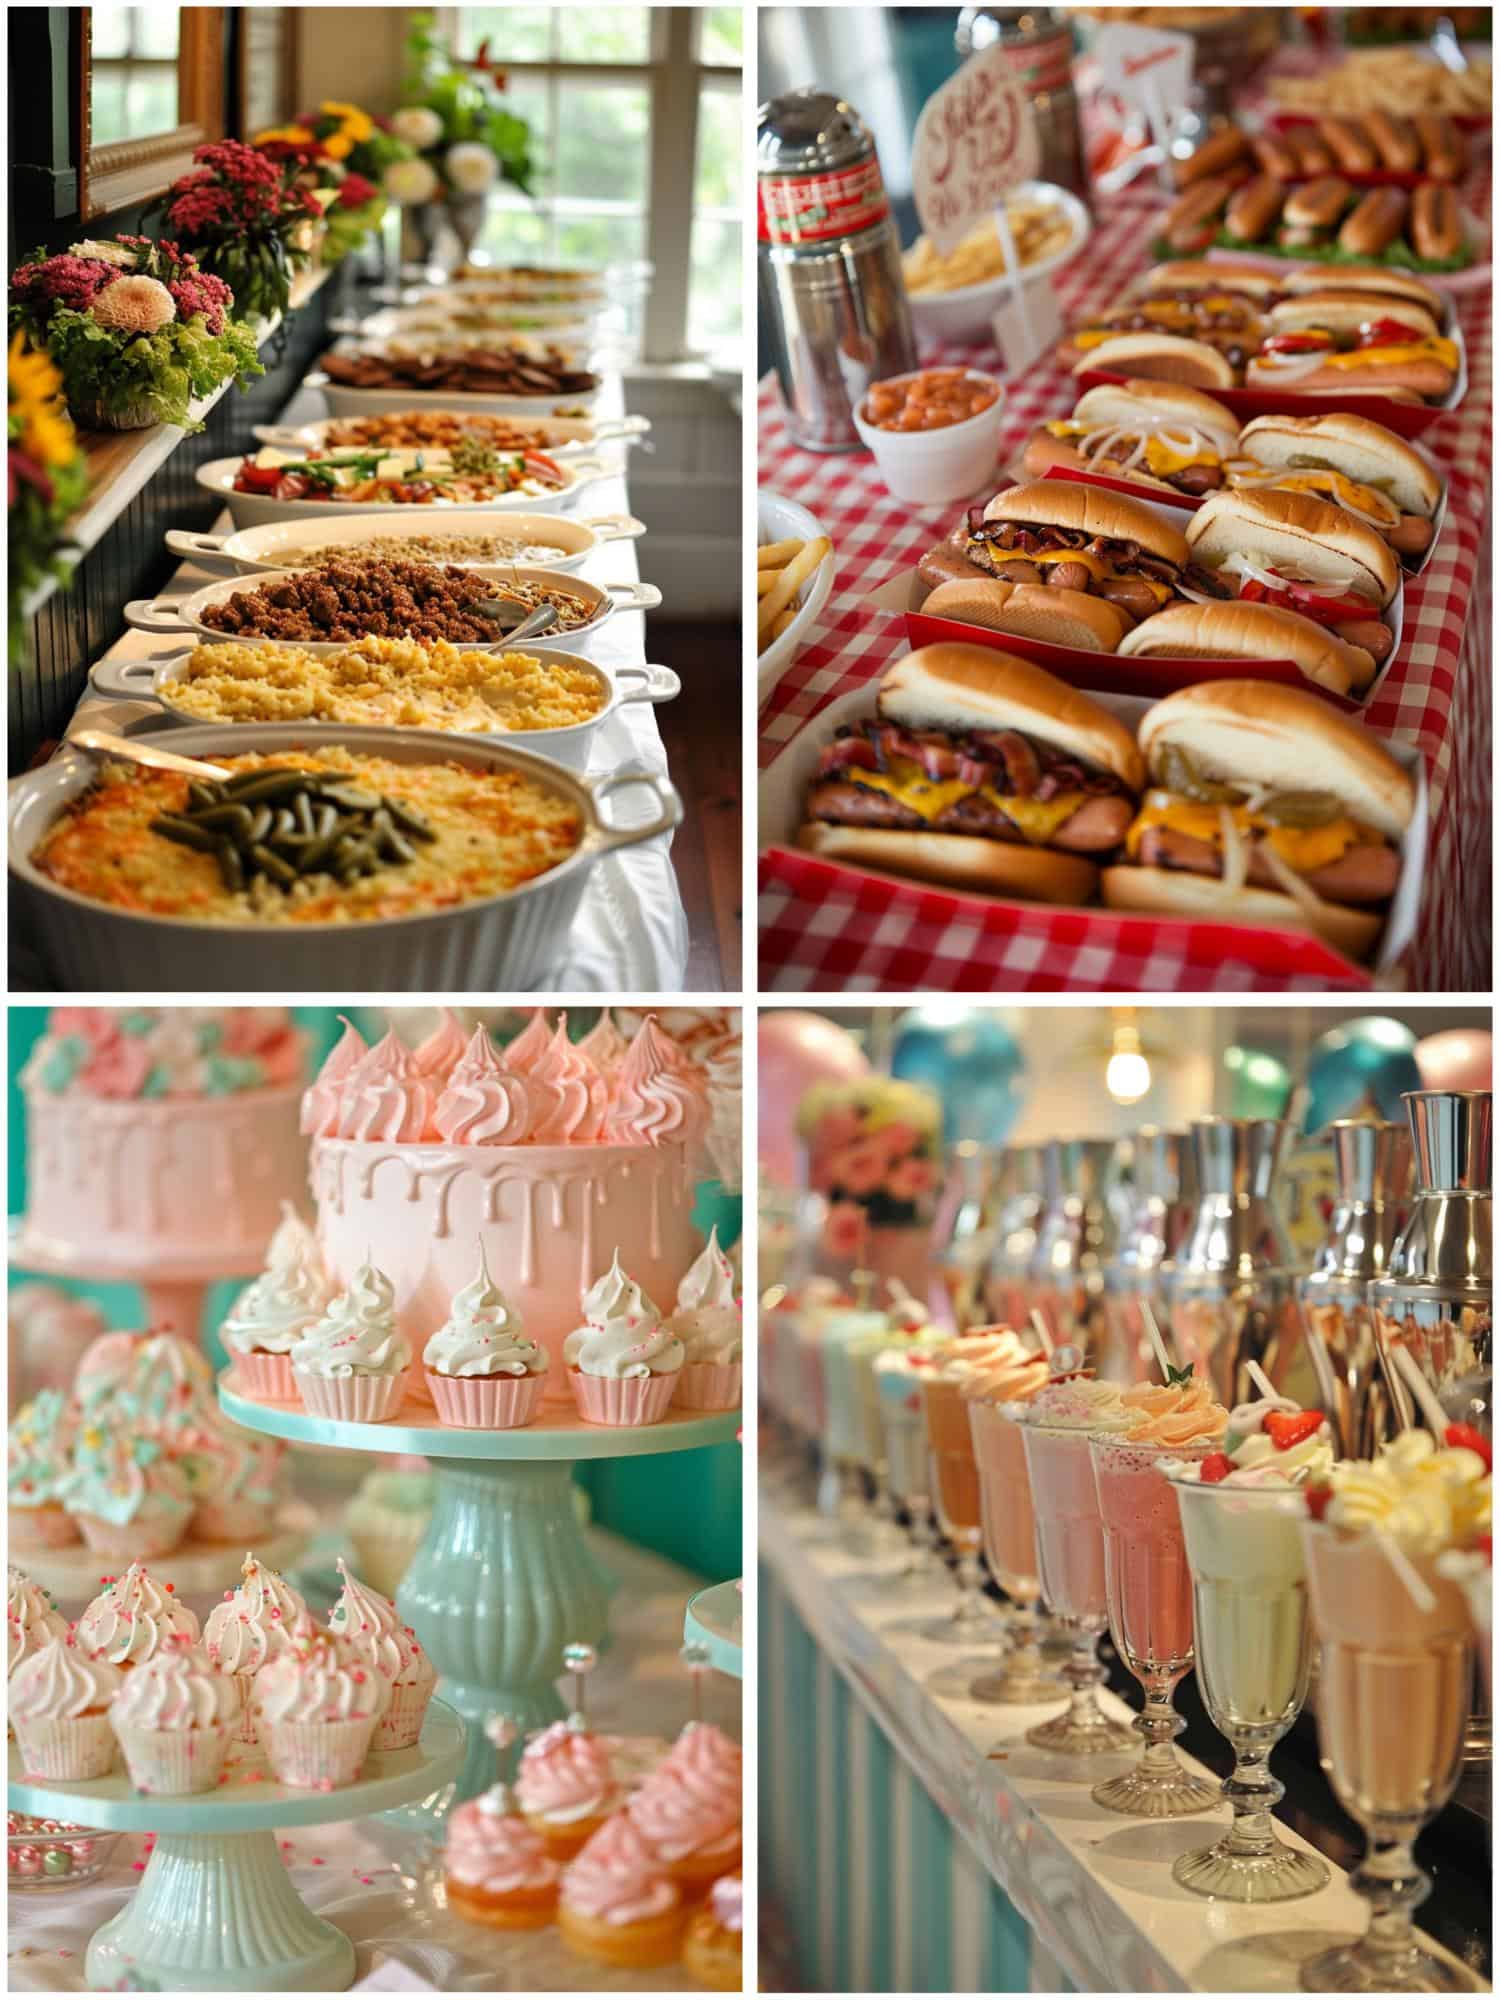 50s inspired wedding food and drinks